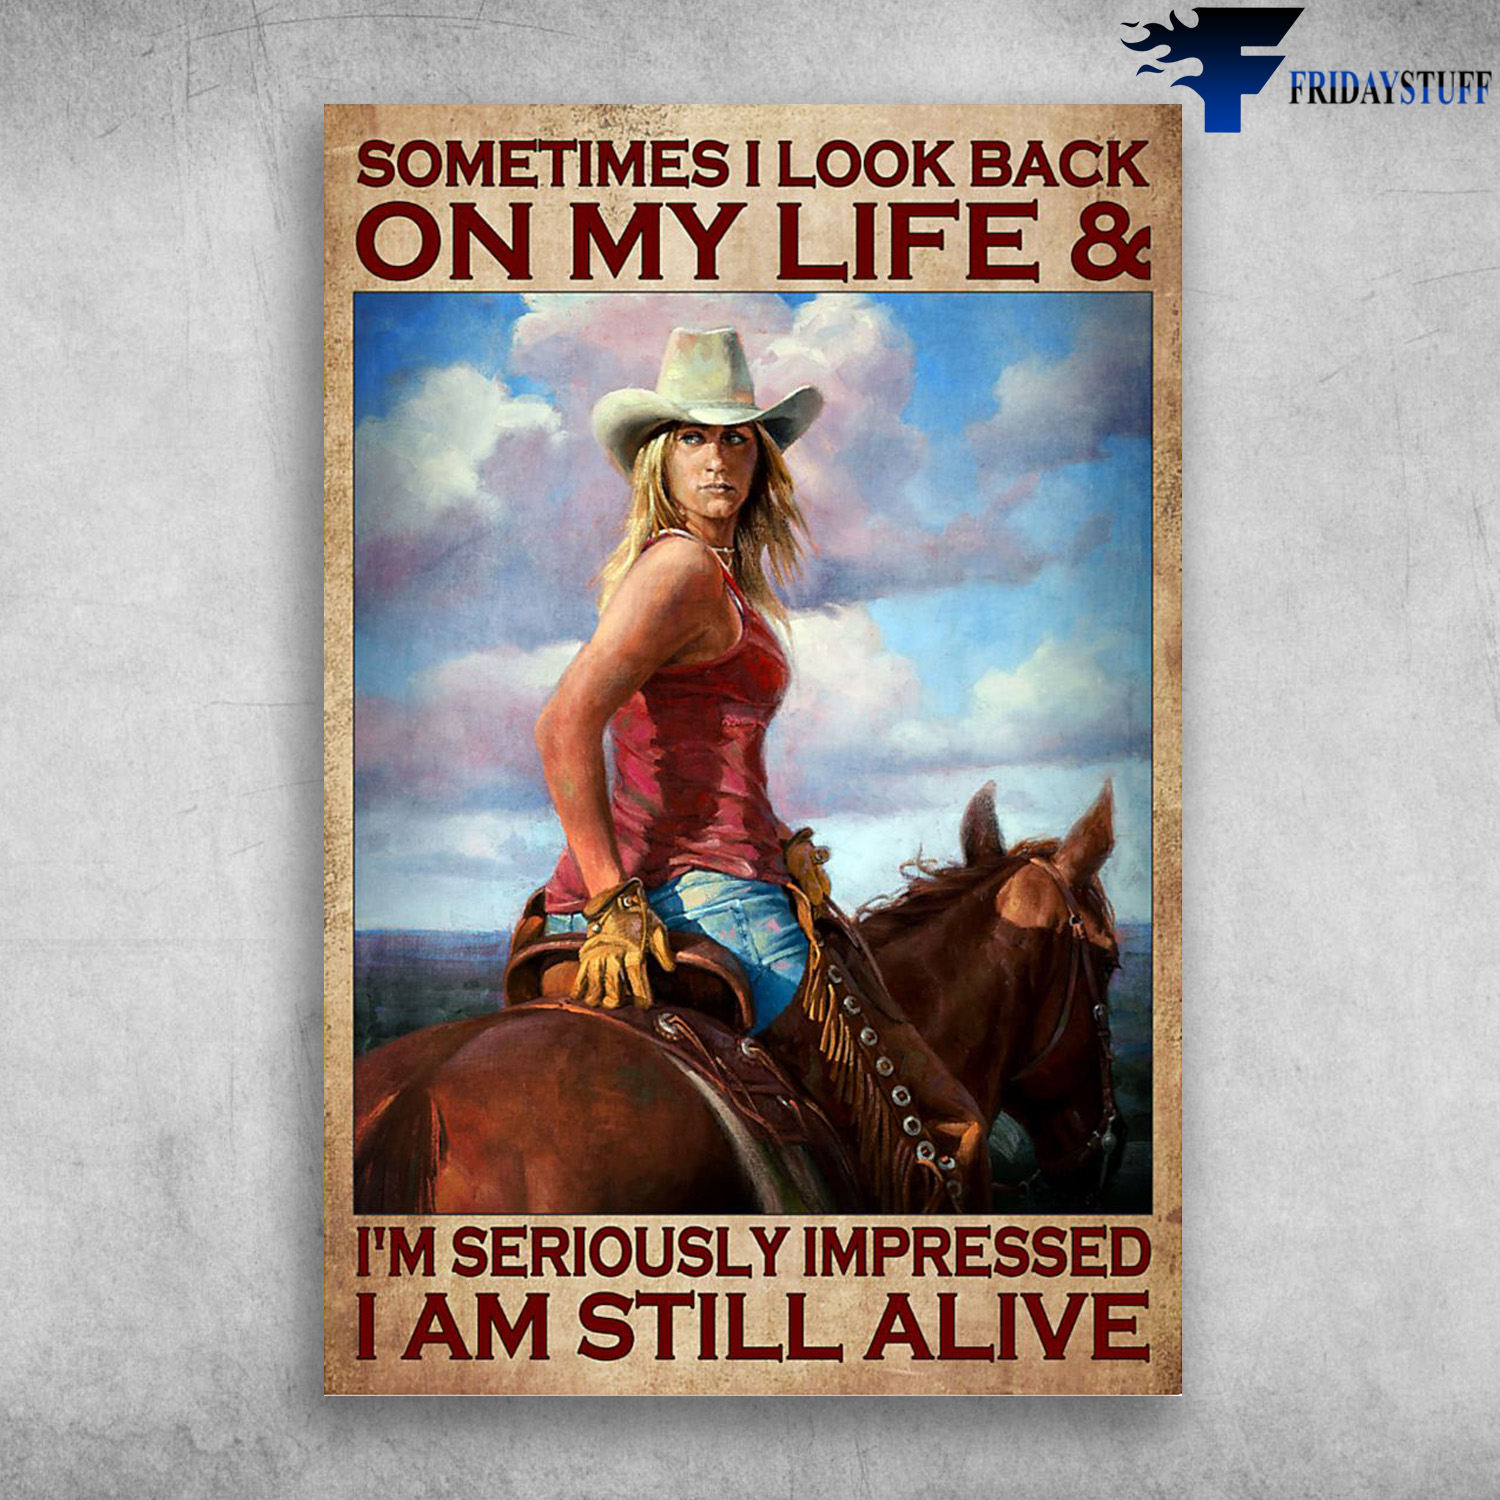 Cowgirl On The Horse - Sometime I Look Back On My Life And I'm Seriously Impressed, I Am Still Alive